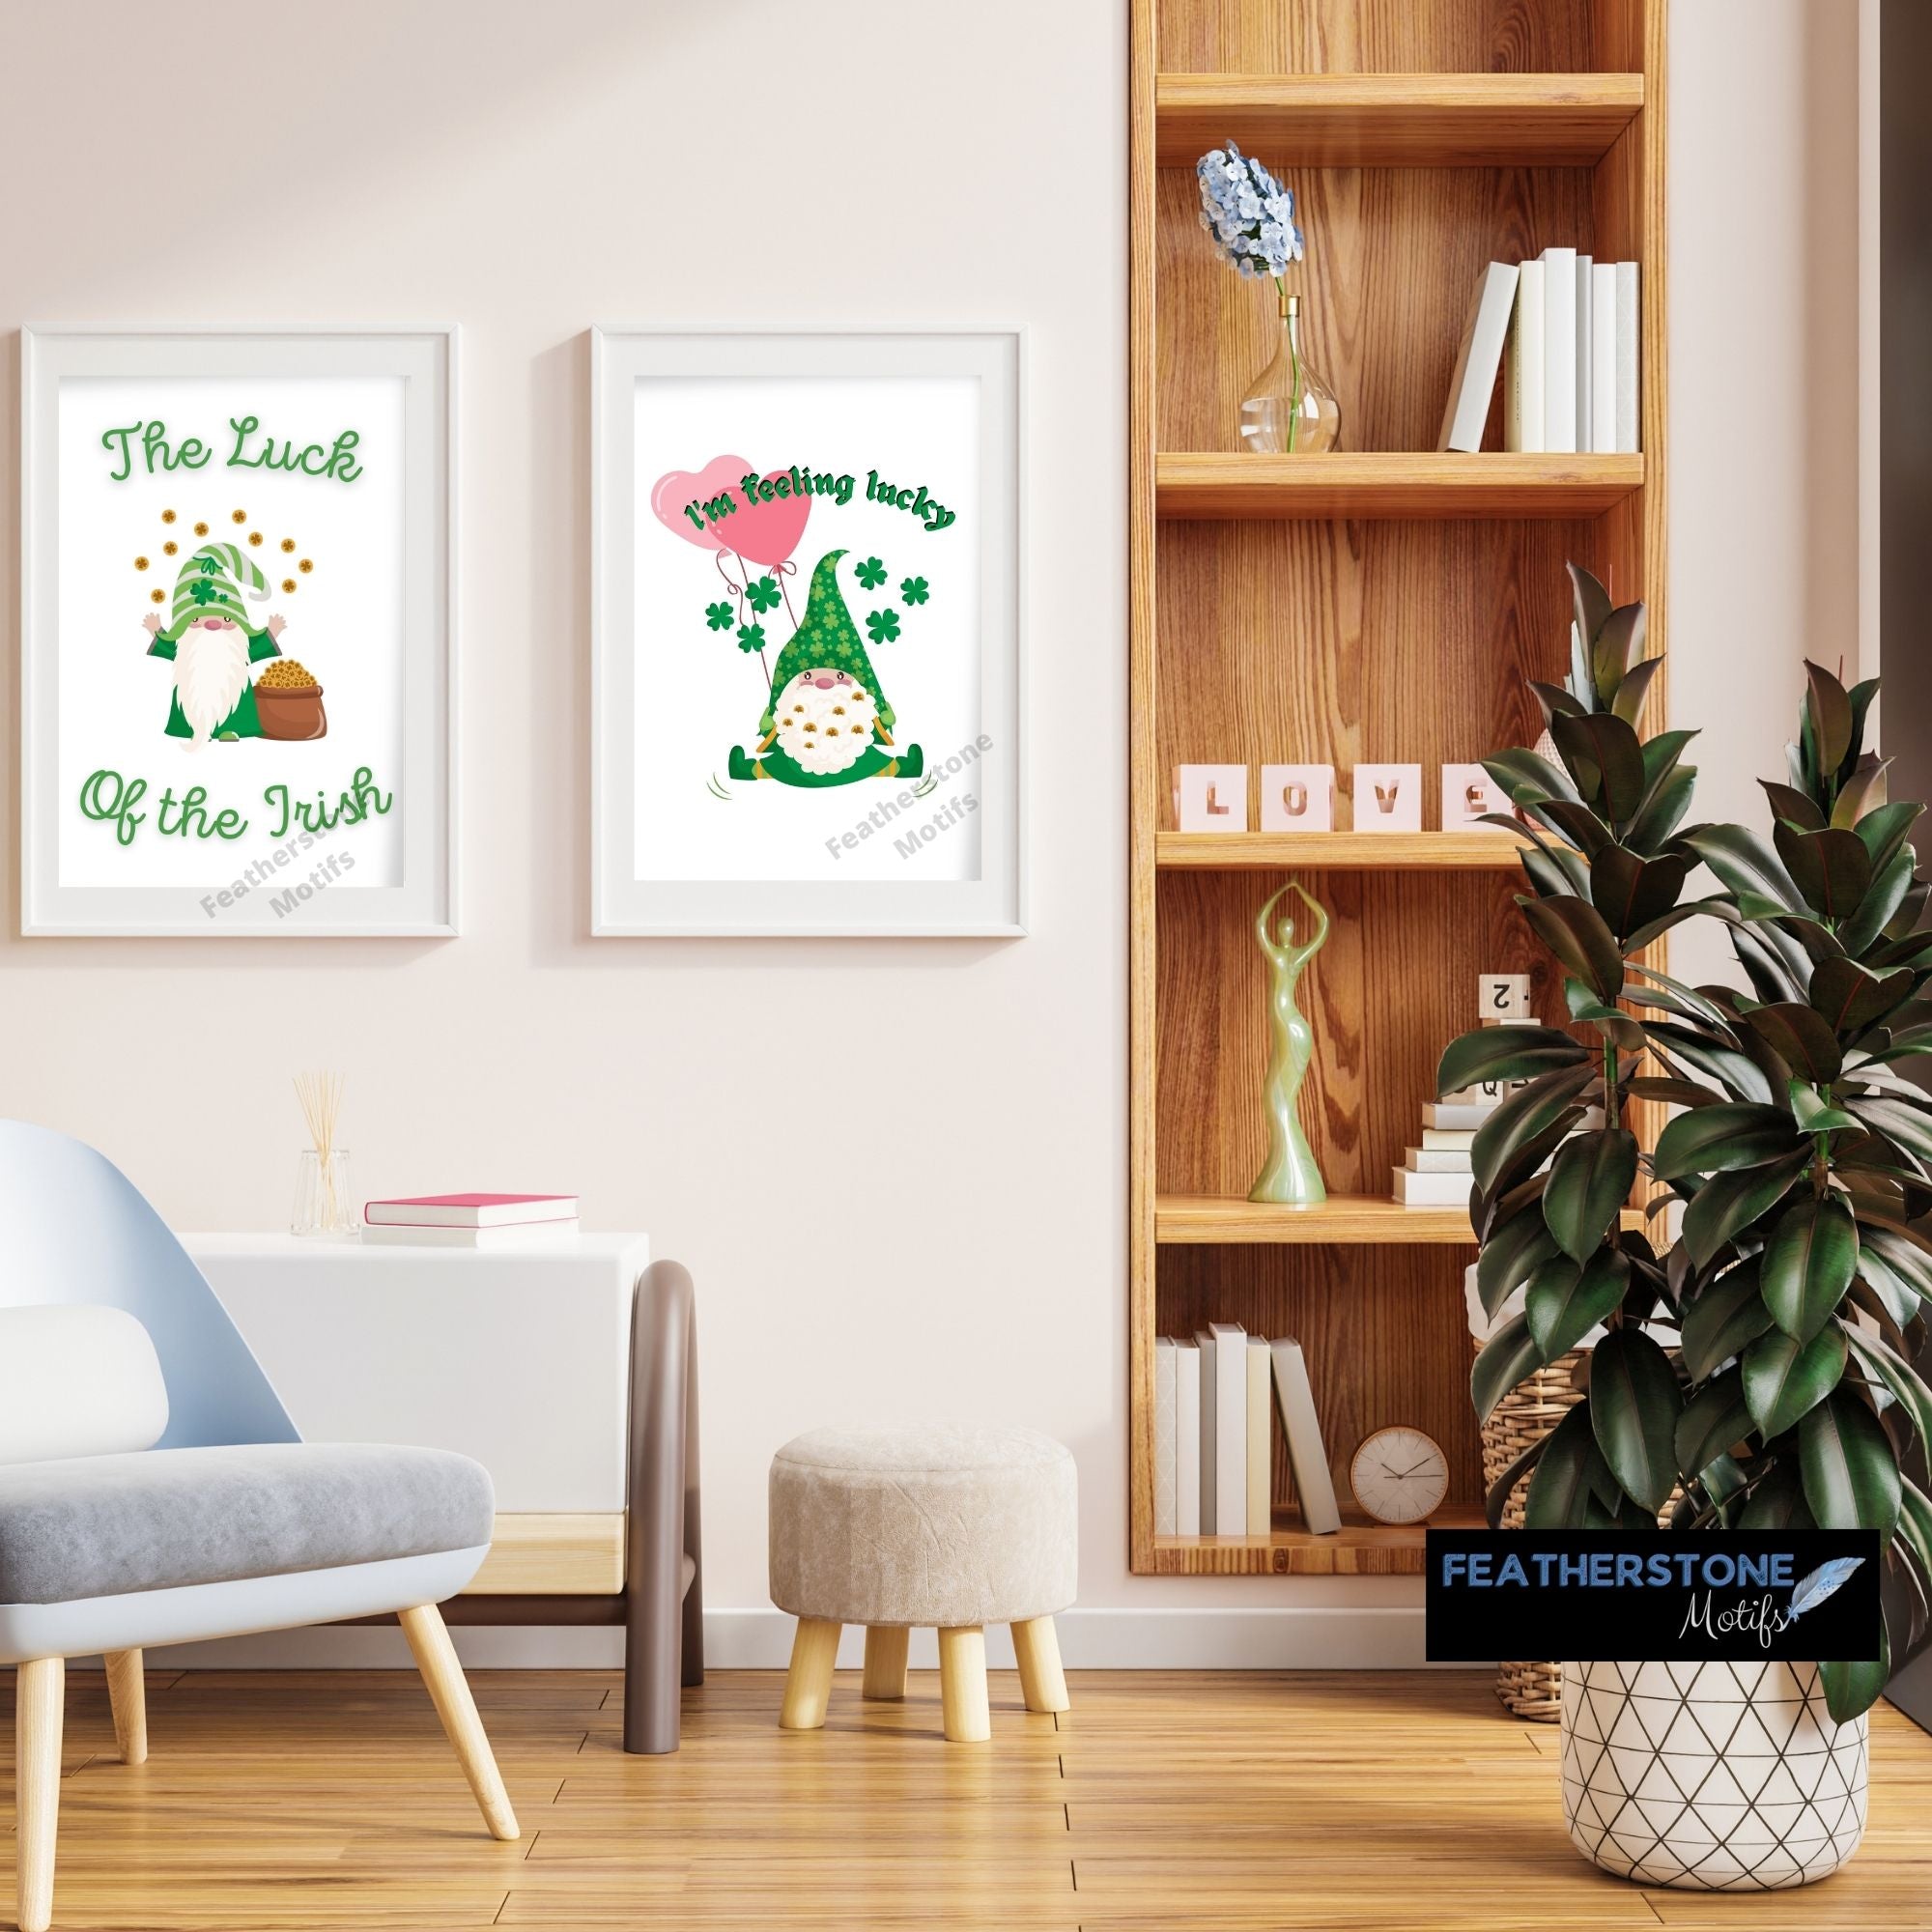 Feeling lucky? This set of 15 digital images are just right for your St. Patrick's Day celebrations! Use for craft projects like handmade coasters and greeting cards, or frame and hang them on the wall.